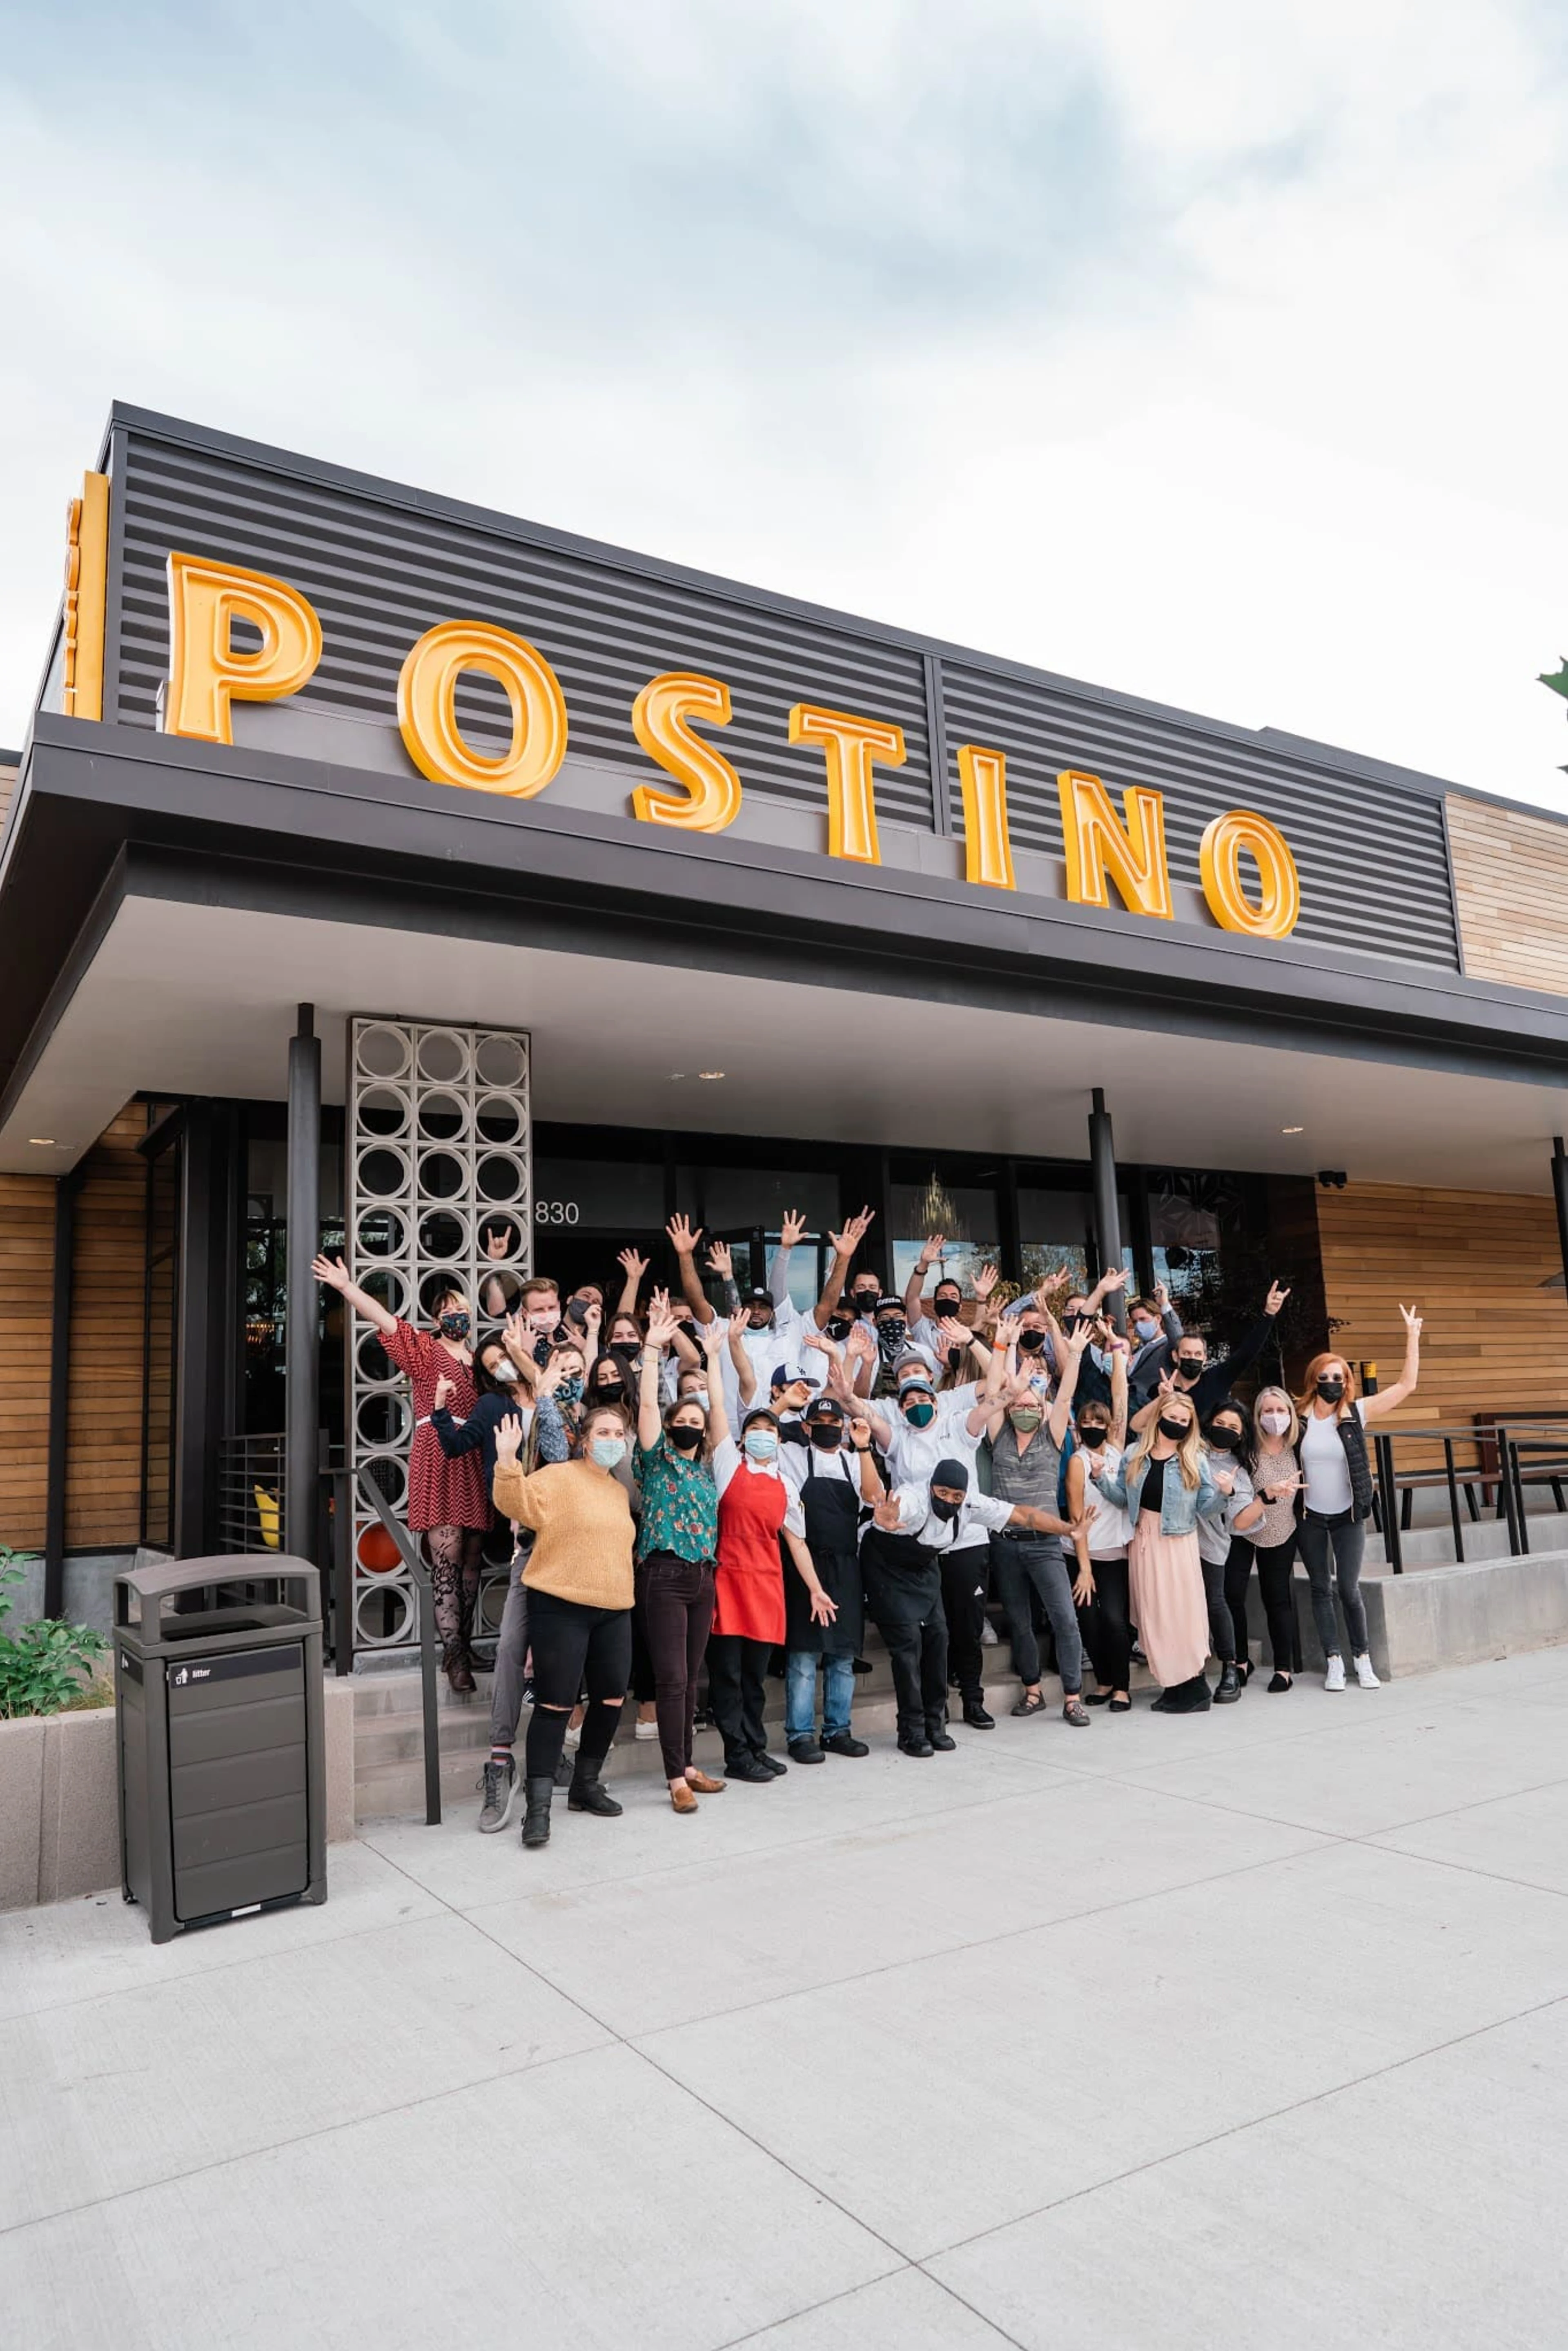 A group of people holding up their hands in front of Postino restaurant.